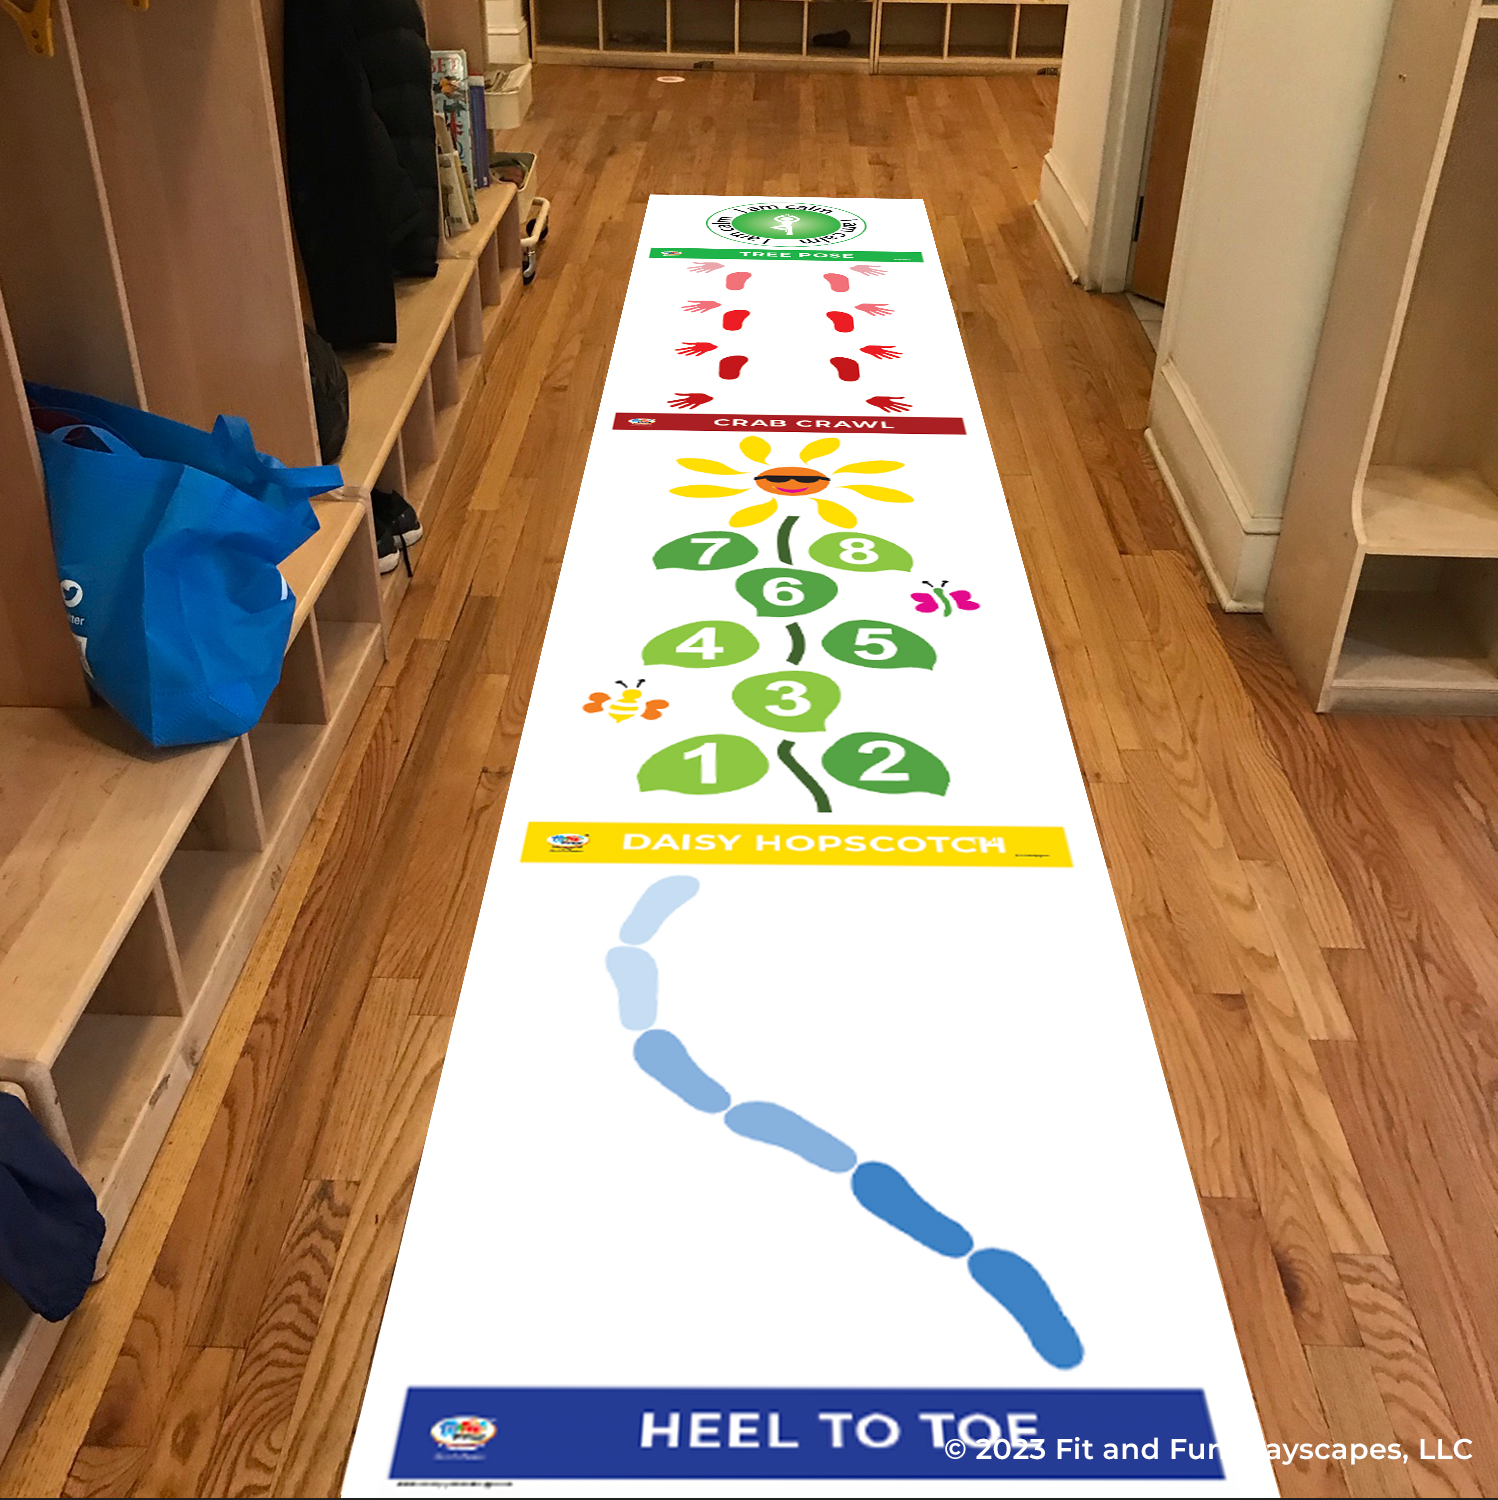 Sensory Space Saver Roll-Out Activity®